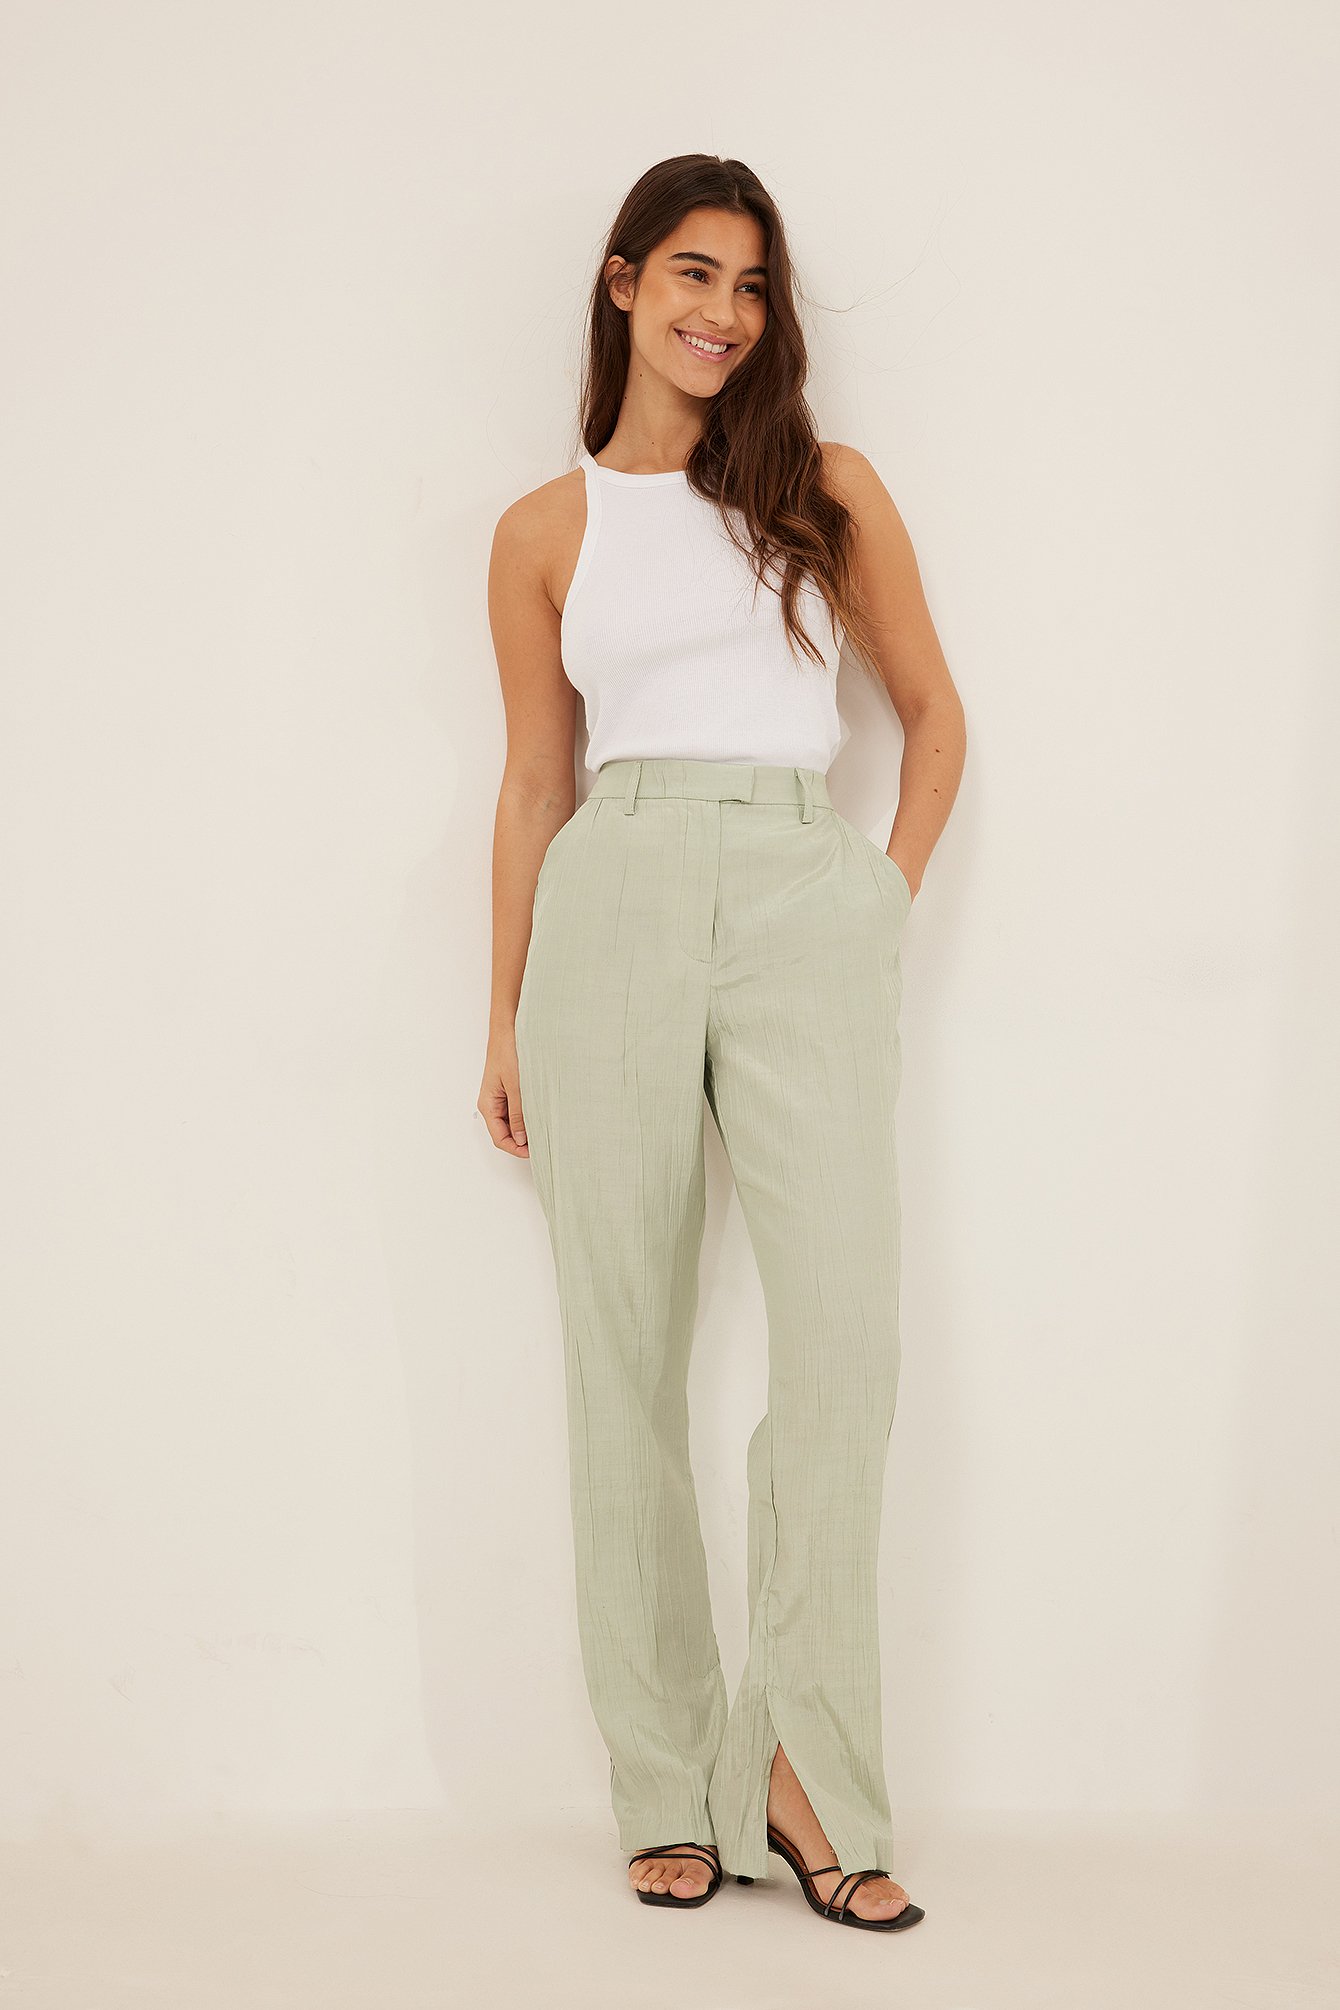 NA-KD Classic Structured Flowy Side Slit Pants - Green